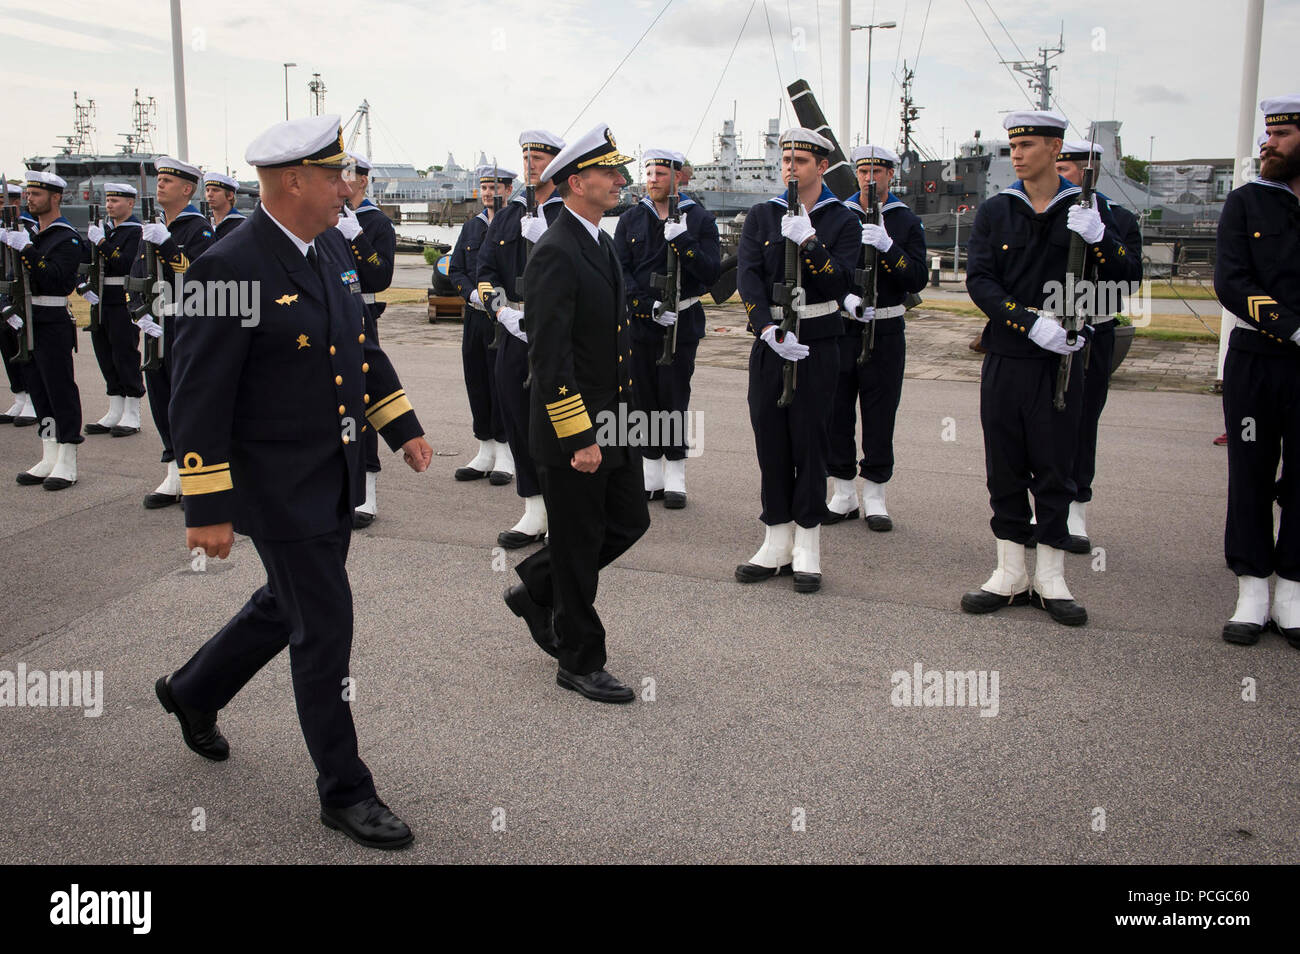 KARLSKRONA, Sweden (July 14, 2015) Chief of Naval Operations (CNO) Adm. Jonathan Greenert and Rear Adm. Jan Thornqvist, chief of staff of the Royal Swedish Navy, inspect the honor guard during a welcome ceremony at Karlskrona Naval Base. Greenert visits Sweden to hold bilateral talks with Royal Swedish Navy leadership and to tour Karlskrona Naval Base. Stock Photo